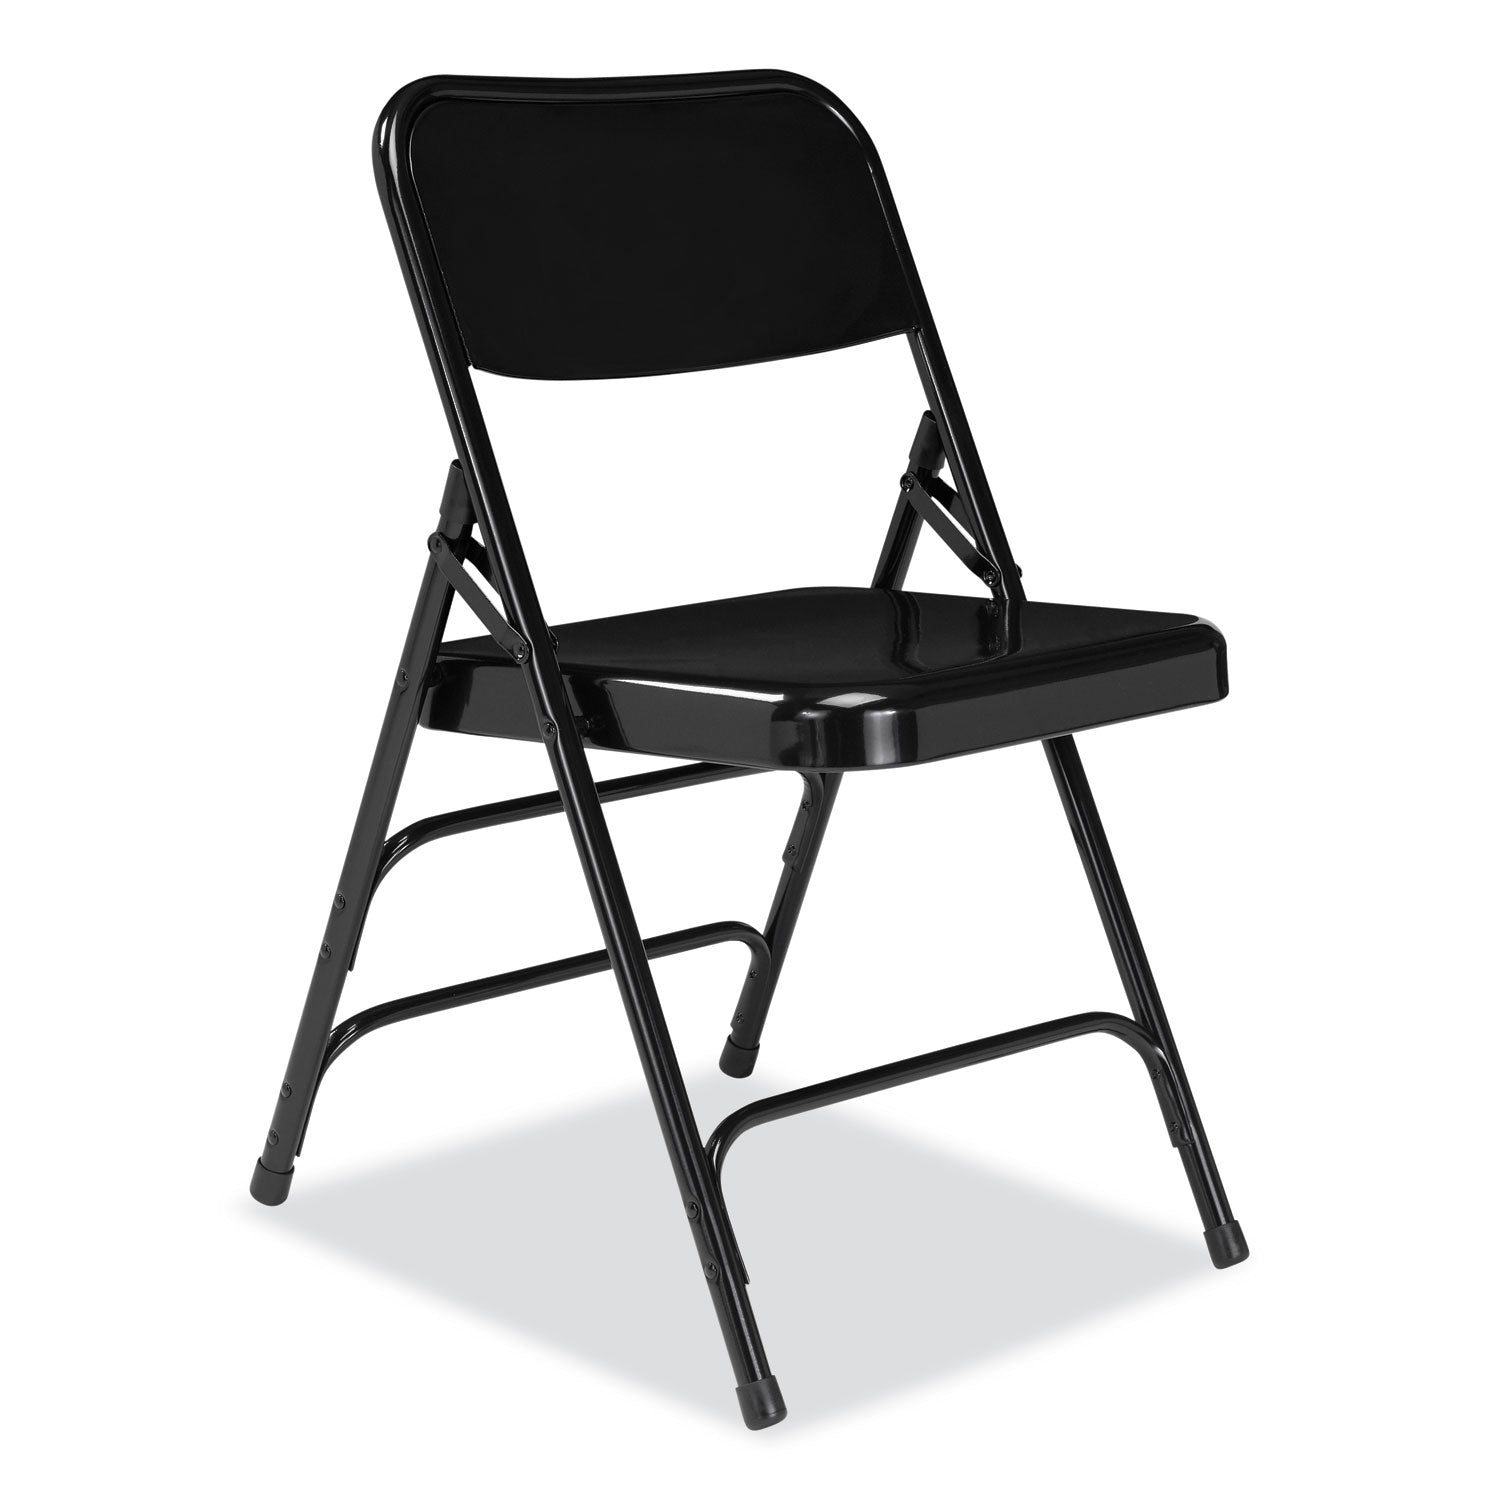 300-series-deluxe-all-steel-triple-brace-folding-chair-supports-480-lb-1725-seat-ht-black-4-ct-ships-in-1-3-bus-days_nps310 - 2